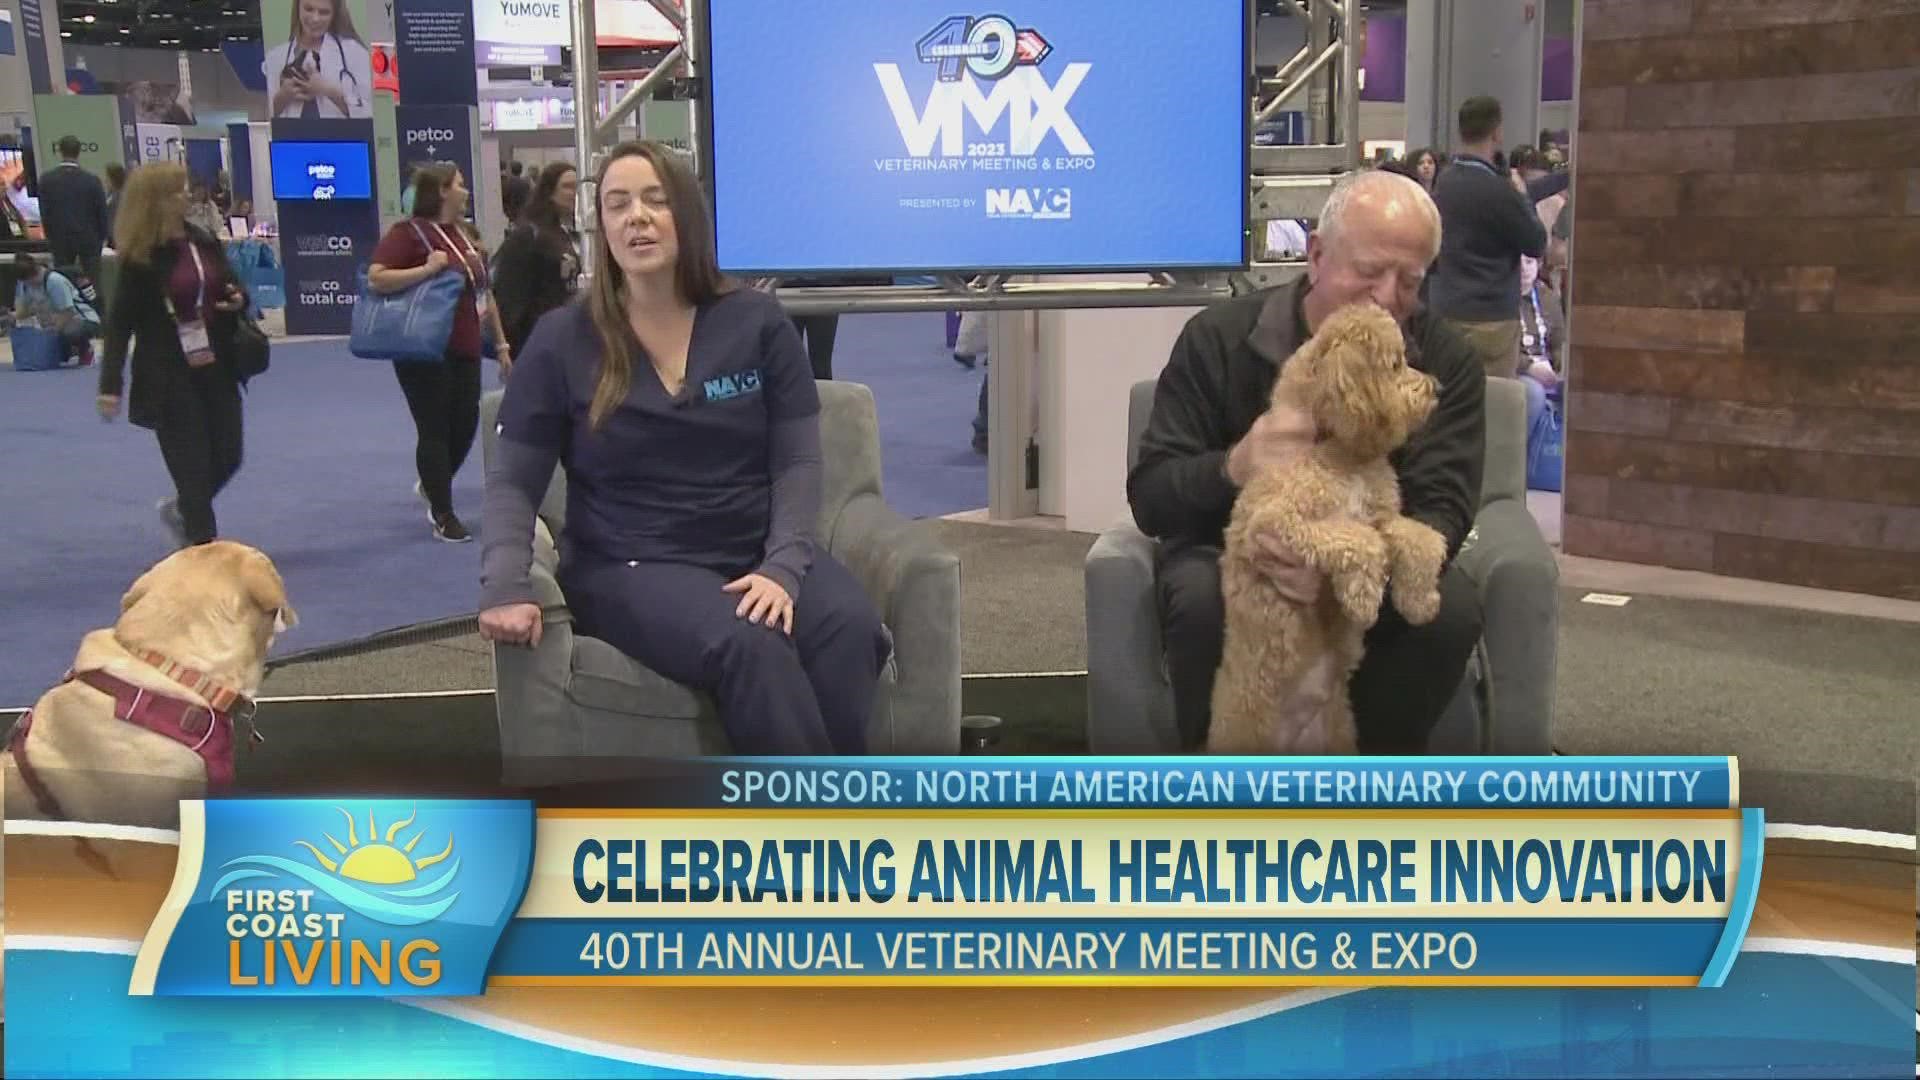 Gene O'Neill and Dr. Dana Varble of the NAVC share medical advances helping our furry family members and exciting innovations presented at this year's conference.